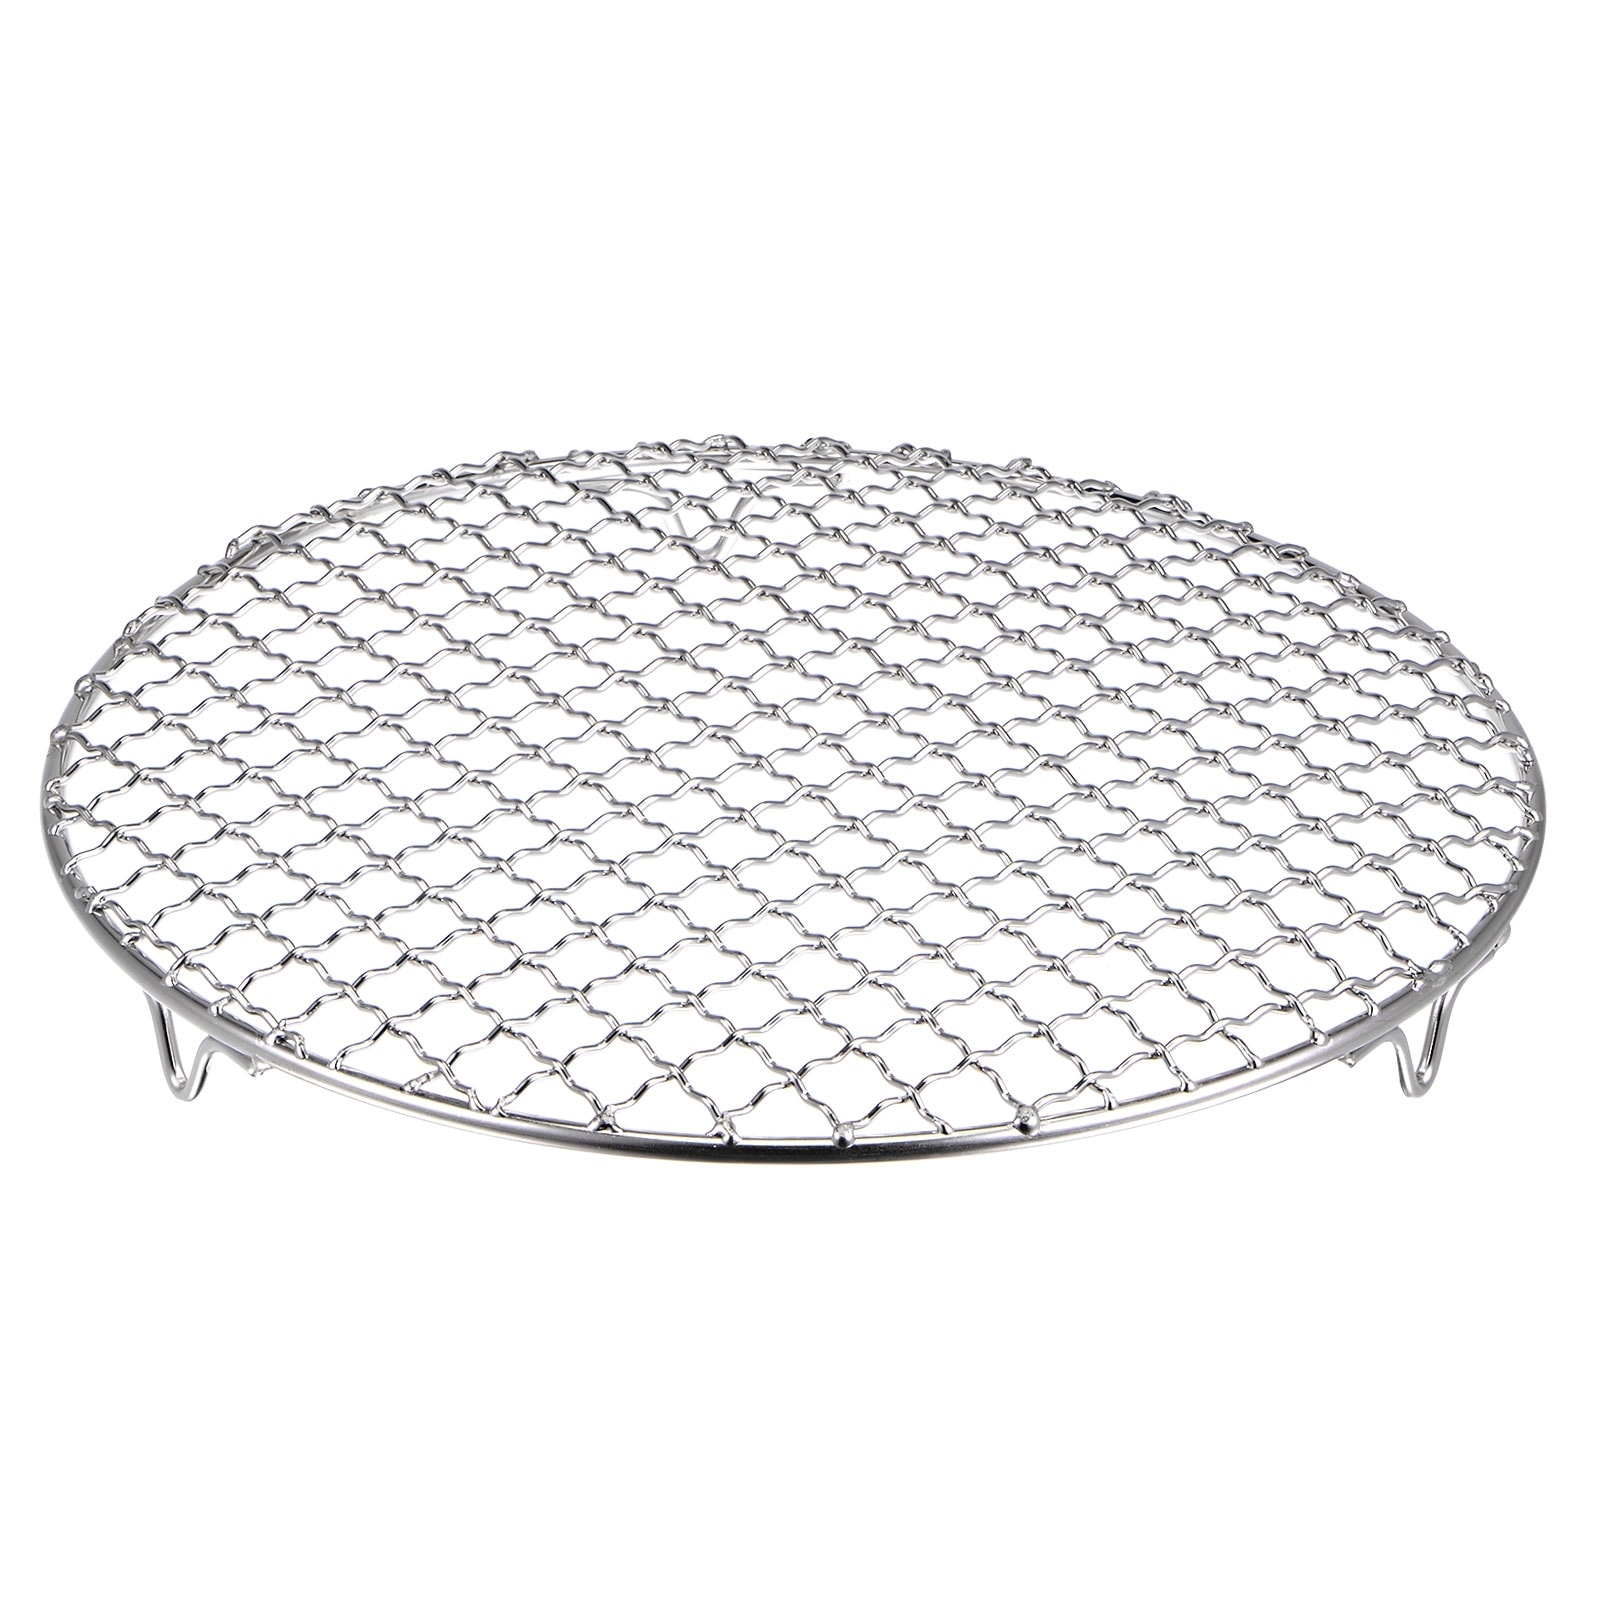 https://ak1.ostkcdn.com/images/products/is/images/direct/839a053749c004ef4c669ce9e1a278c434cd2795/Round-Cooking-Rack-9.7-inch-Stainless-Steel-Cross-Wire-Barbecue-Grill-with-Legs.jpg